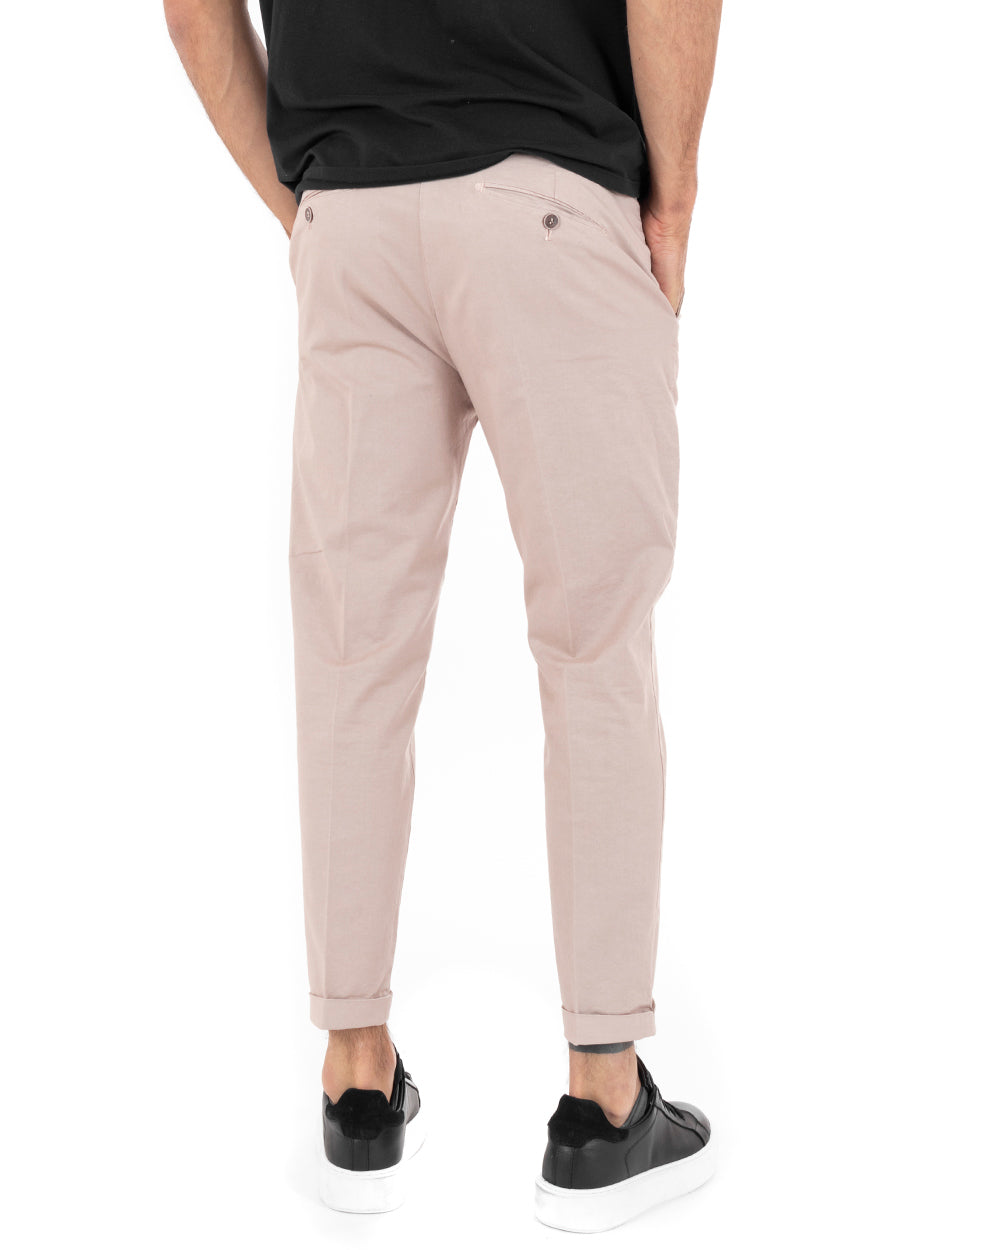 Men's Classic Basic Long Solid Color Casual Black America Pocket Trousers GIOSAL-P5695A